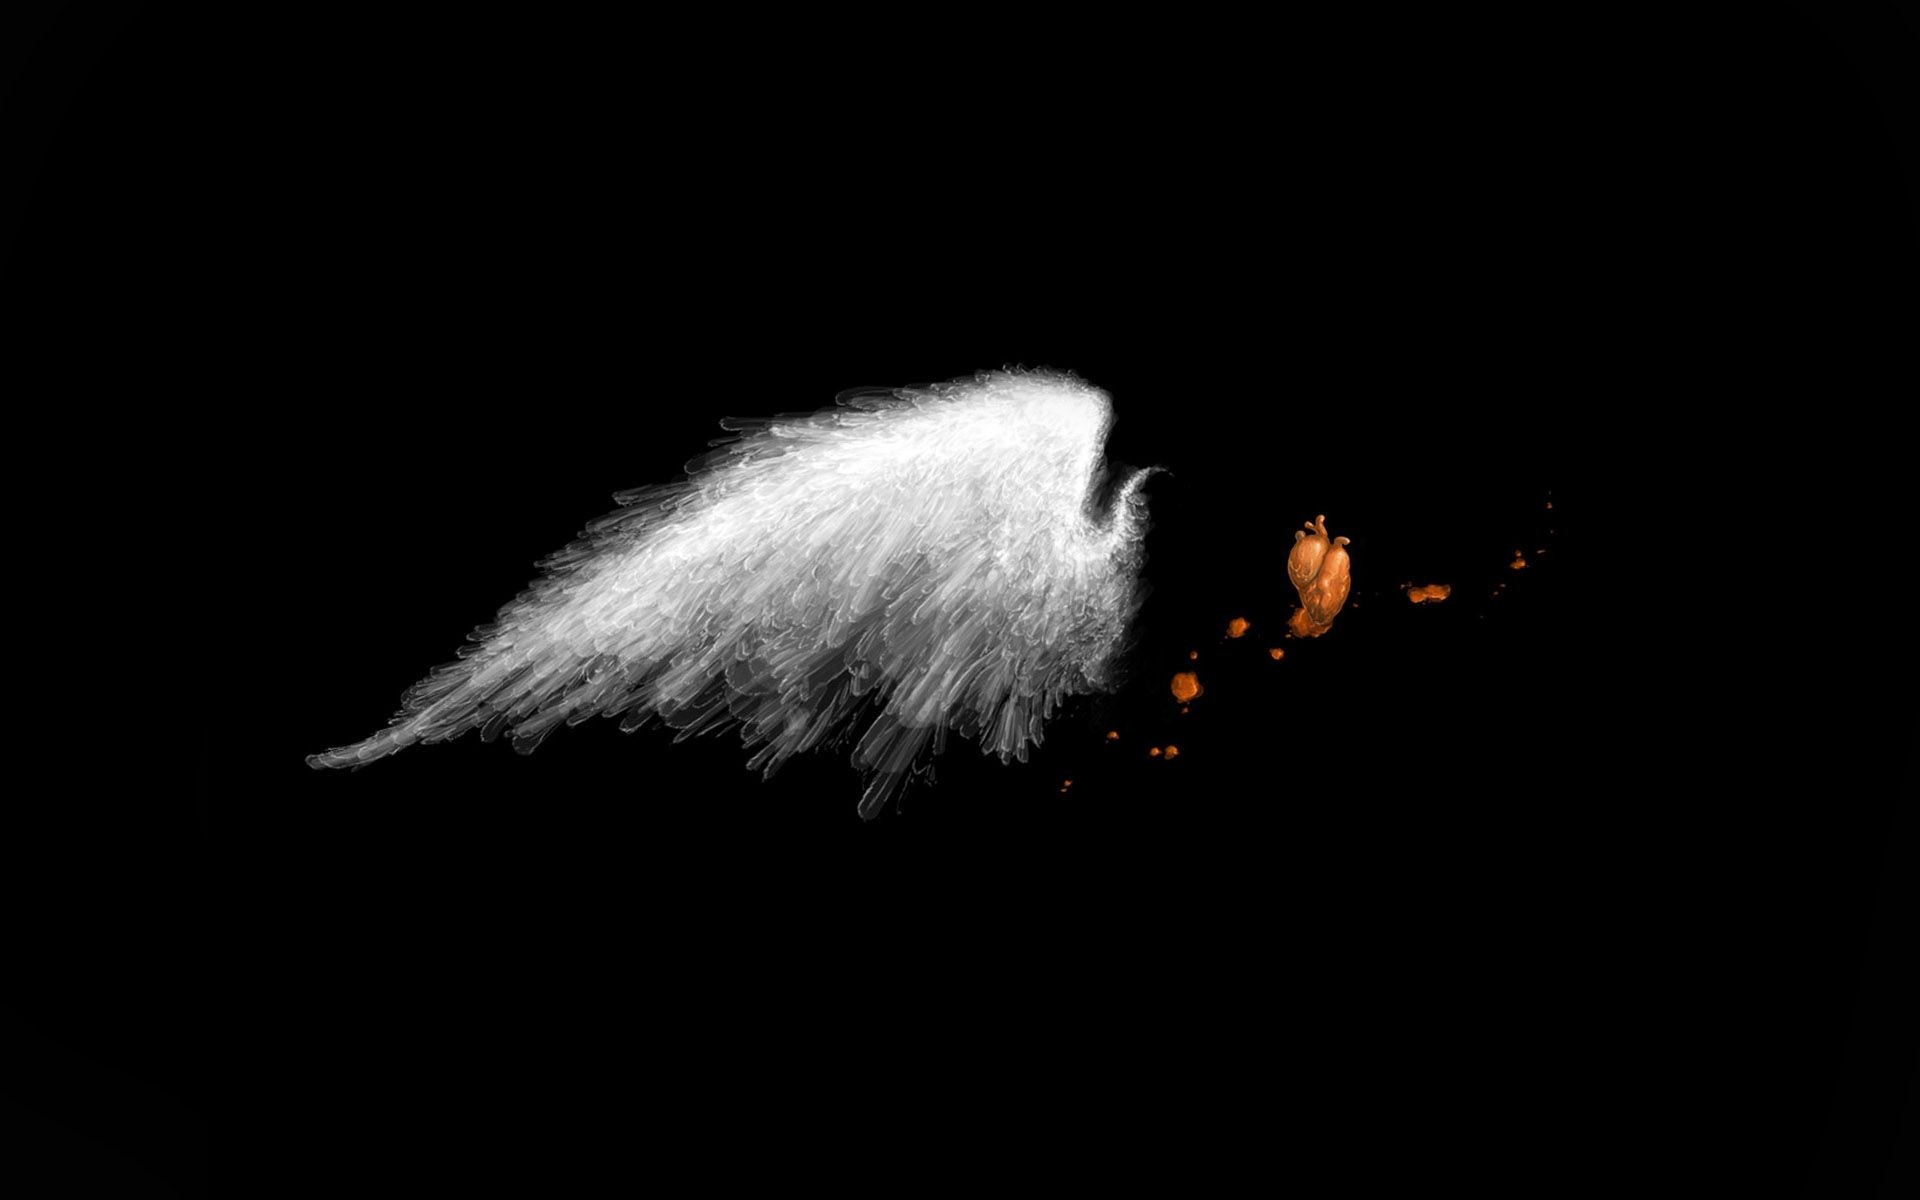 A white feathered wing against a black background - Angels